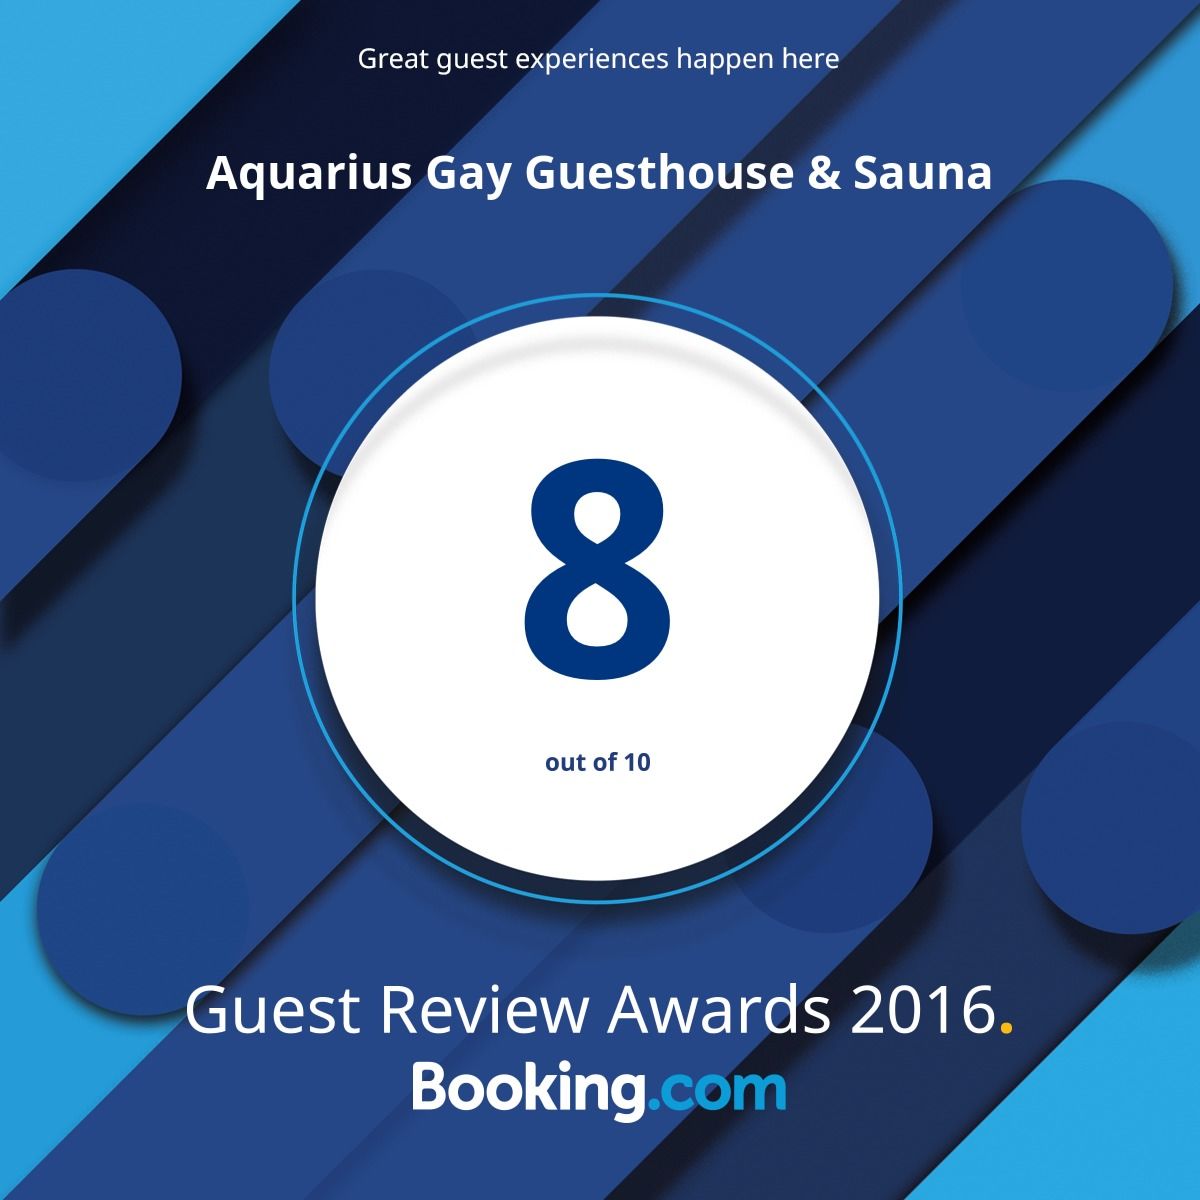 booking.com - Guest Review Award 2016